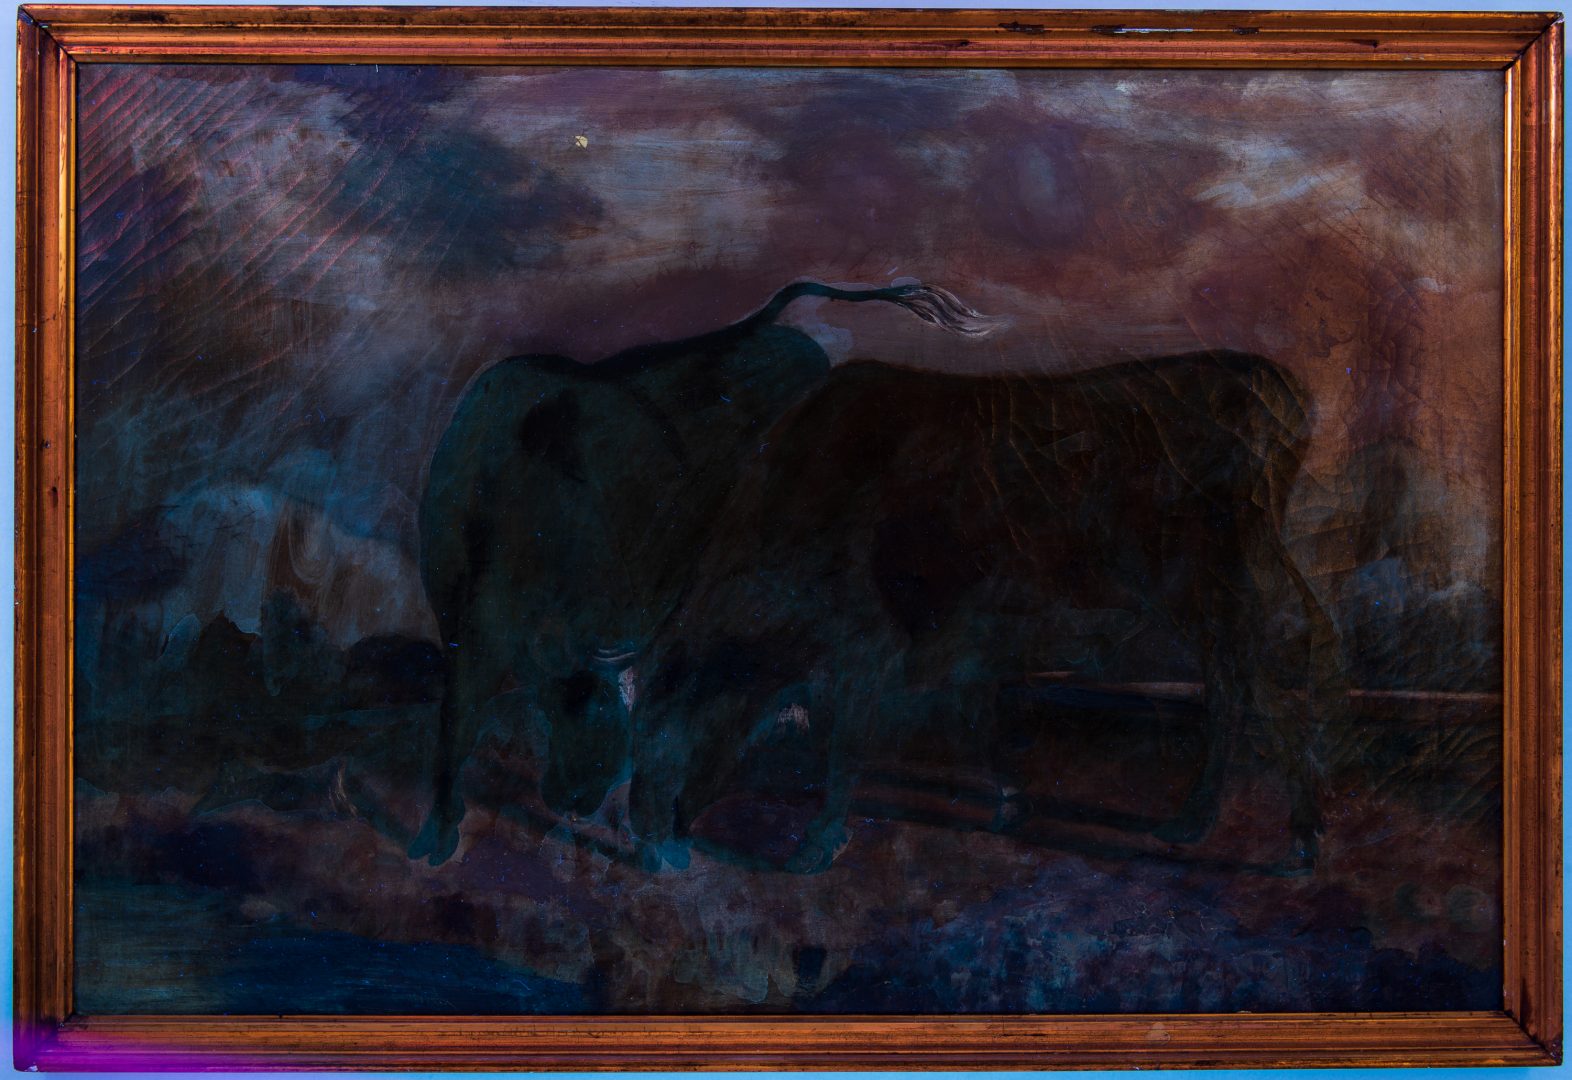 Lot 760: European Oil on Canvas of Bulls by Stream